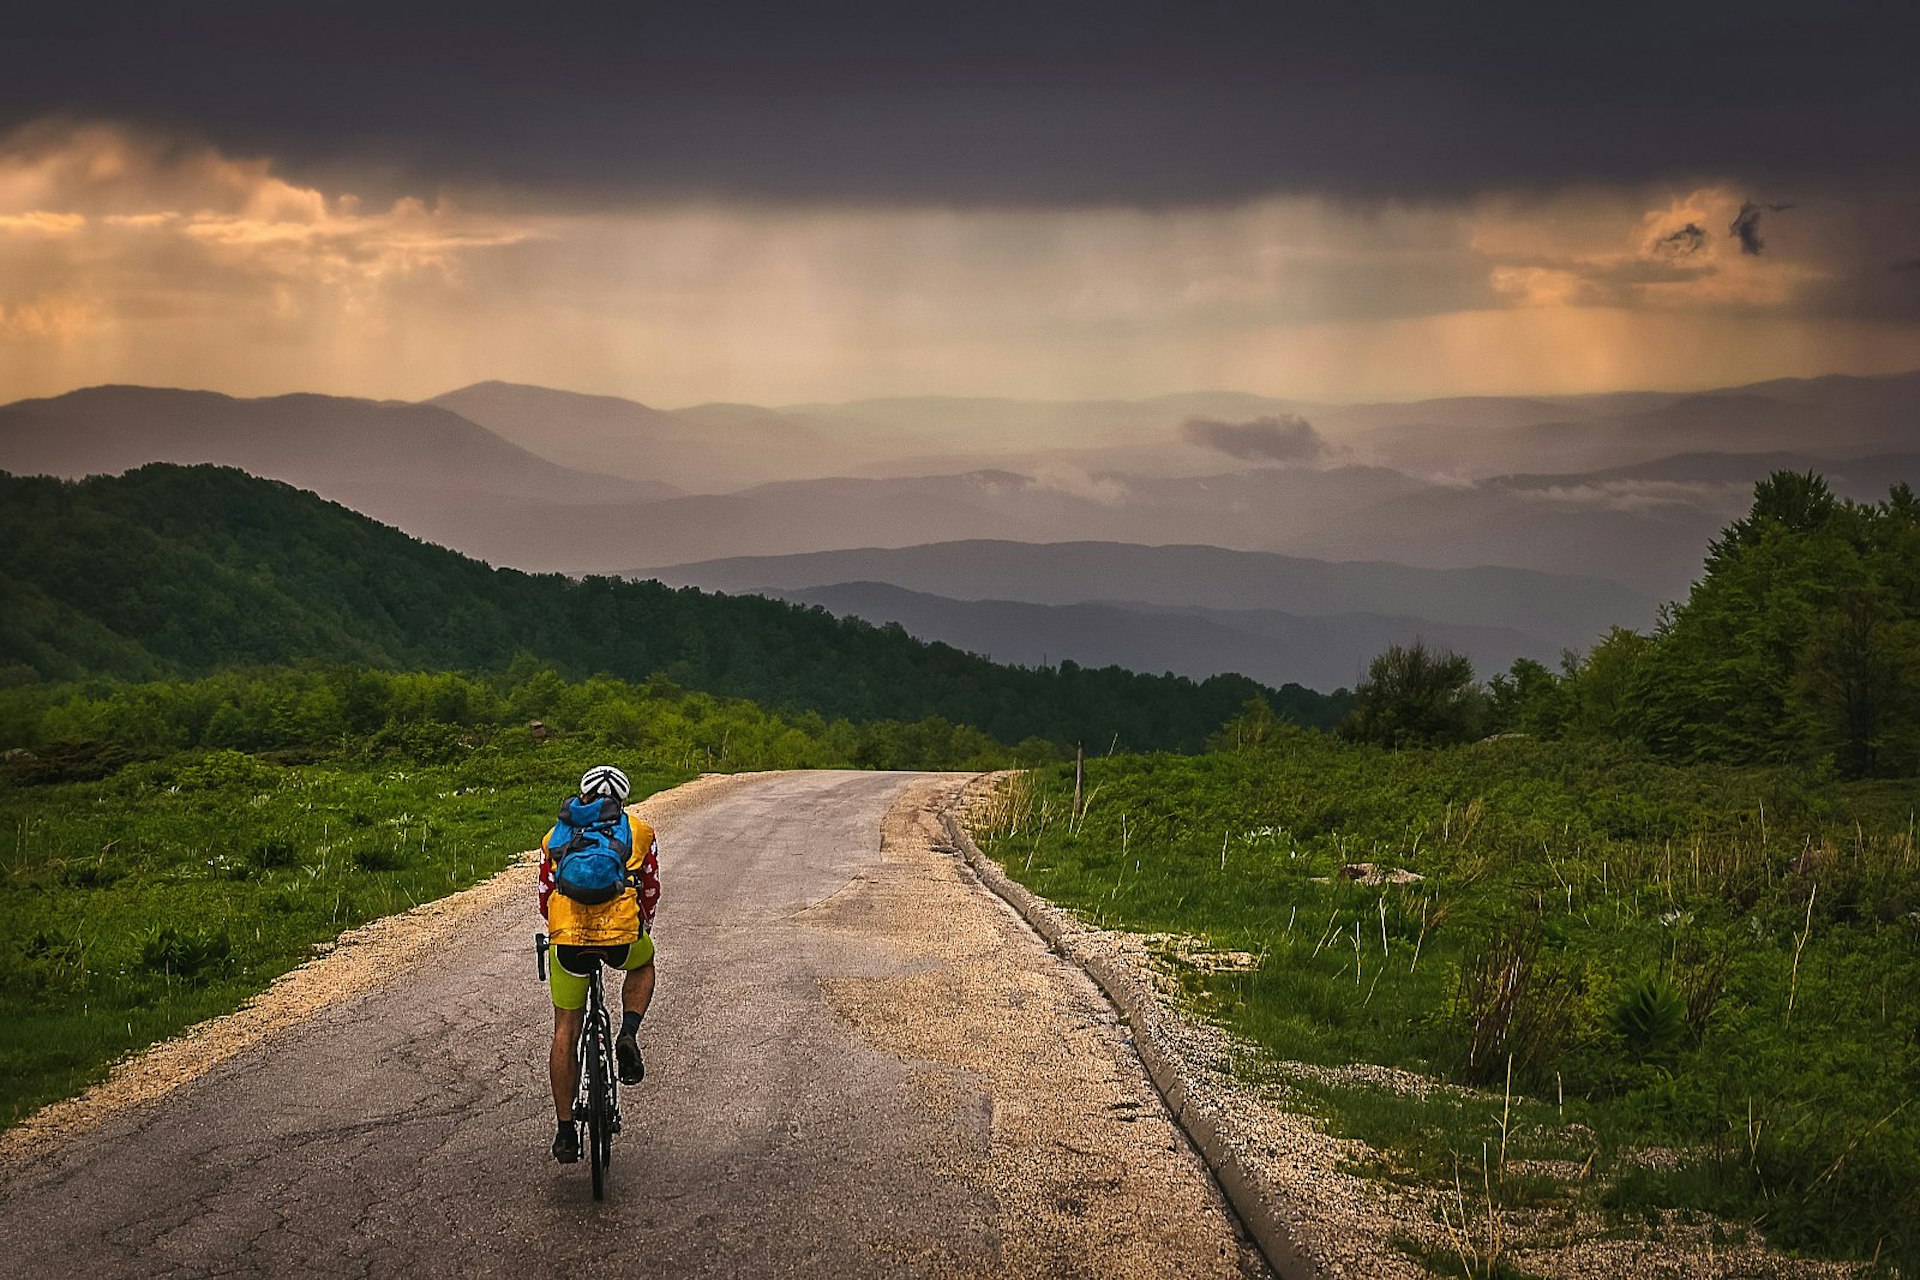 A man cycling alone in the mountains of Serbia on a rainy day; there are silhouetted peaks up ahead and greenery on either side of the road. EuroVelo